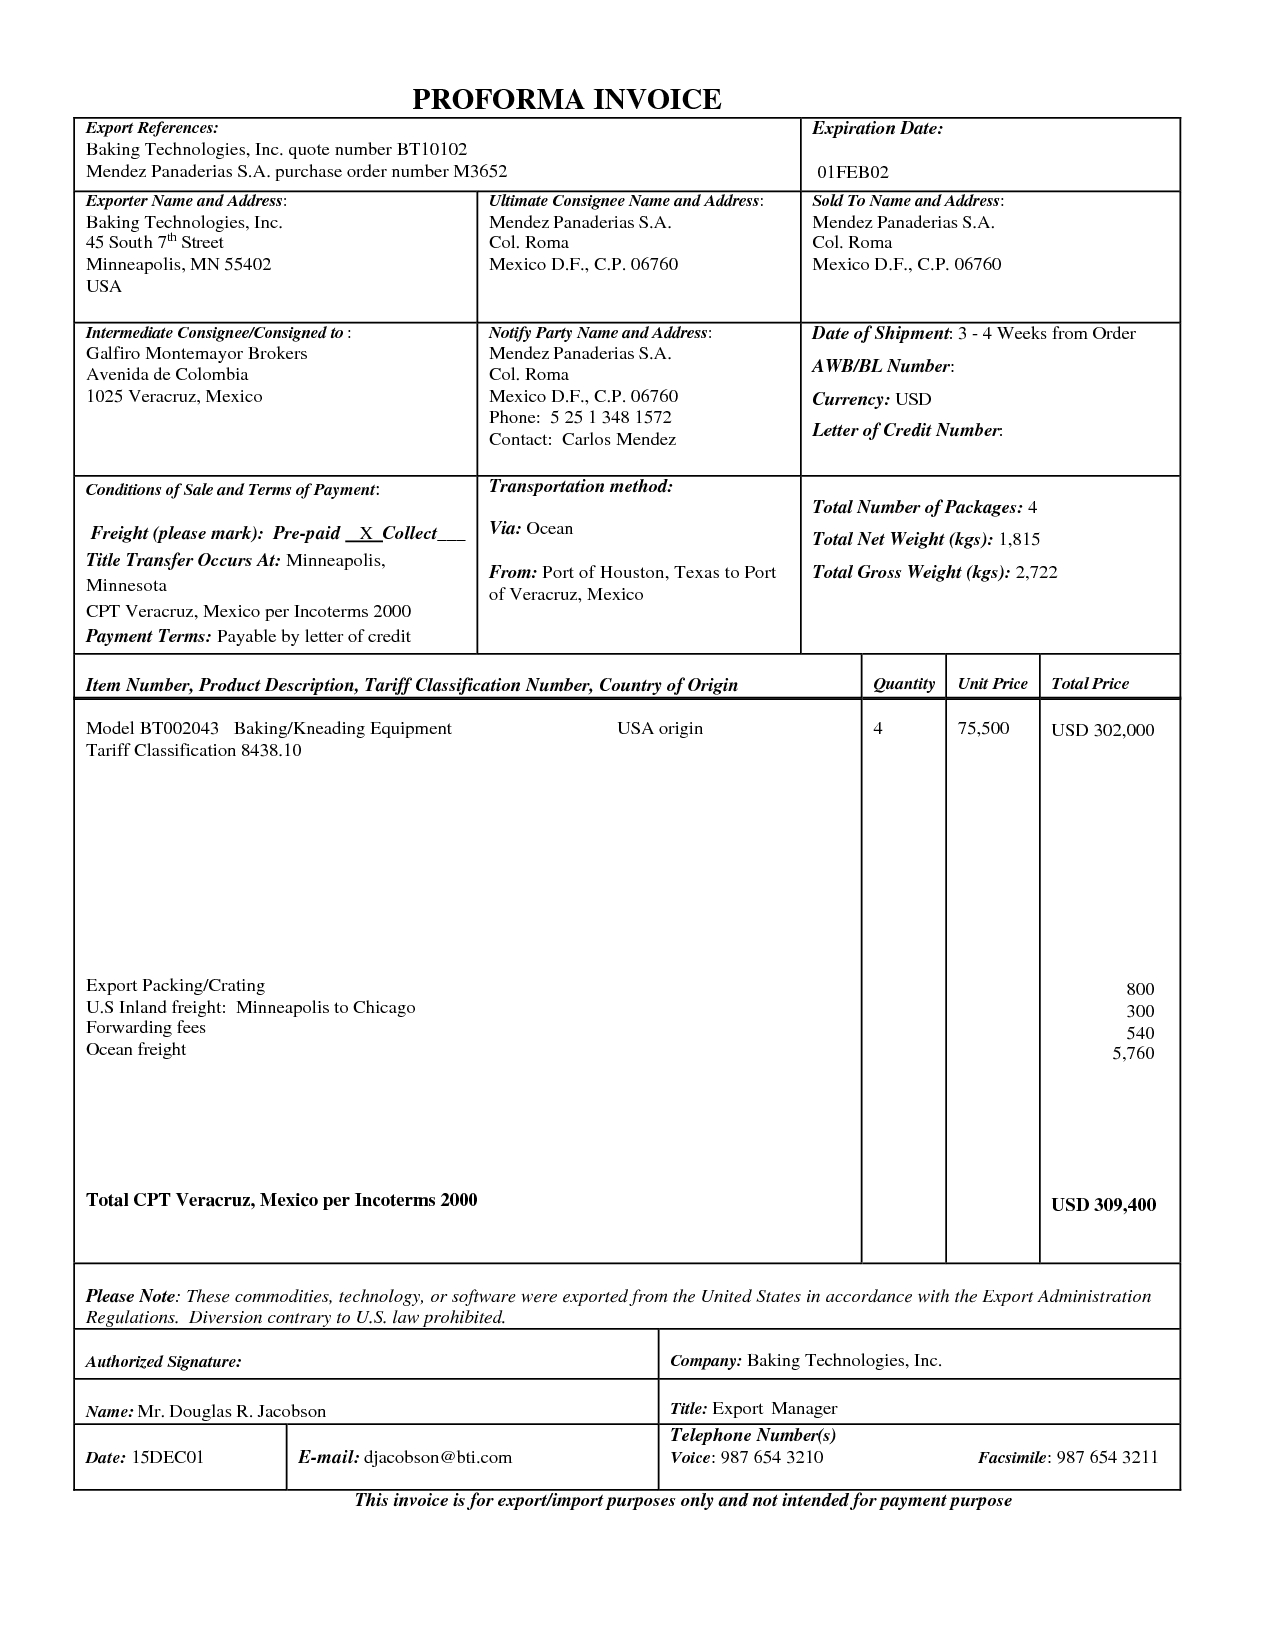 proforma invoice export letter of application for job employment purpose of proforma invoice